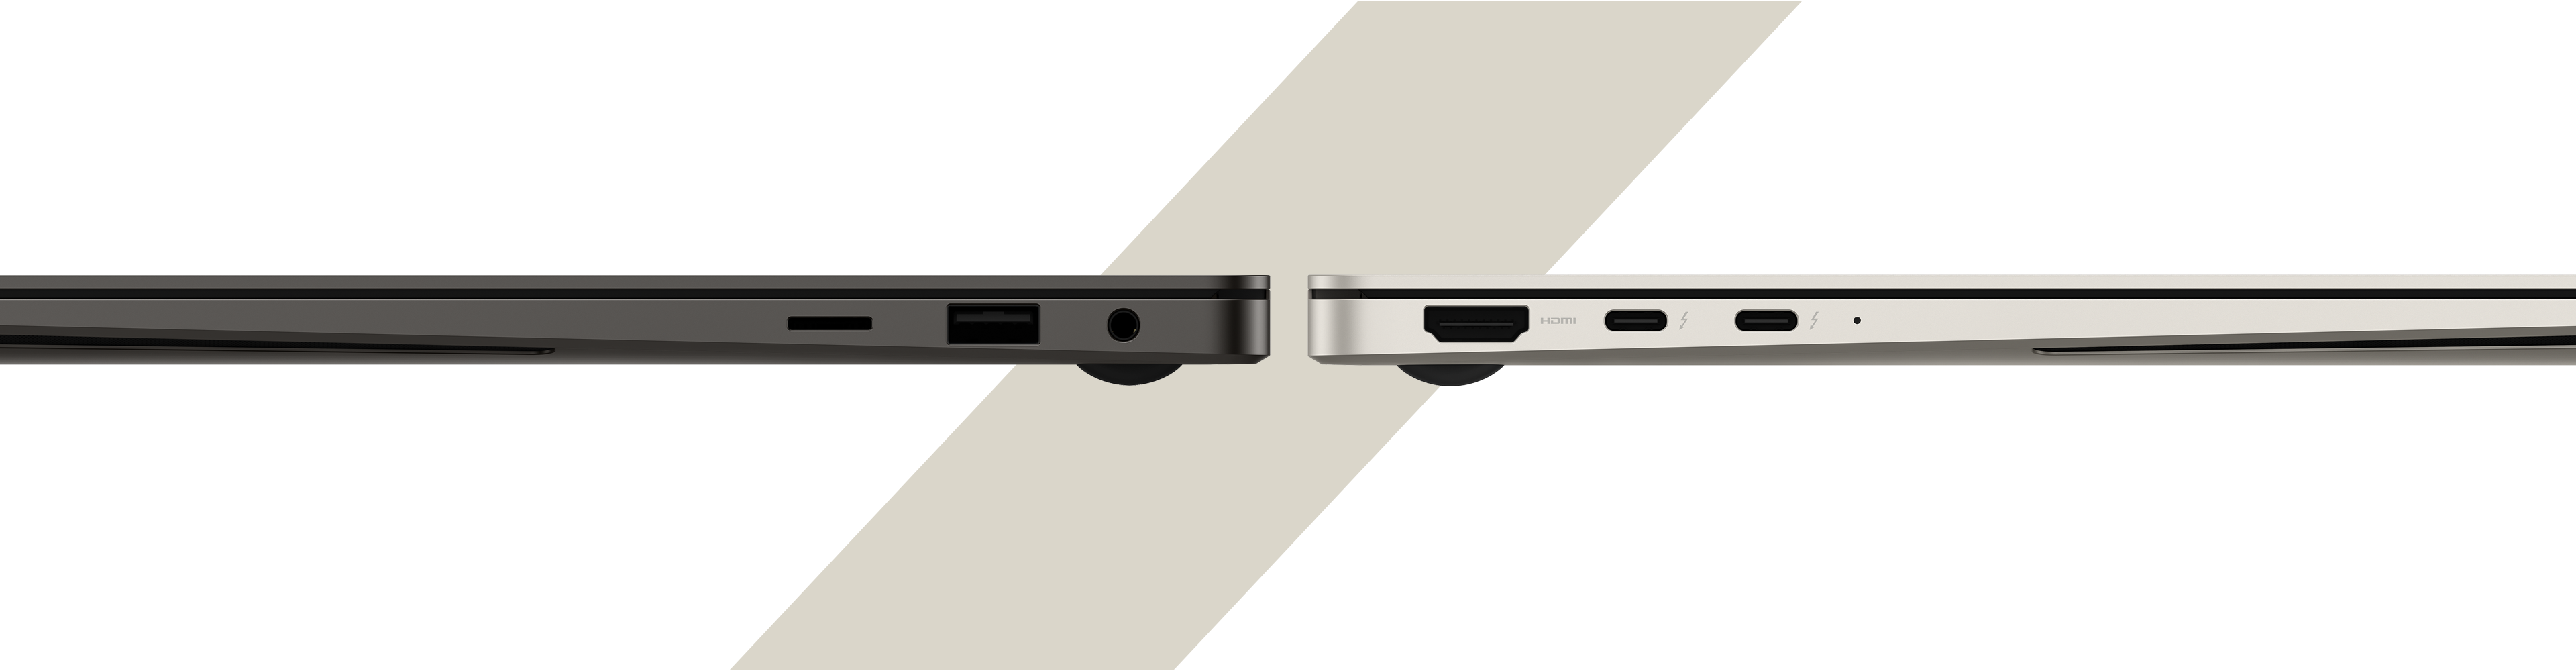 This image describes the full ports on both sides of the Galaxy book 3.